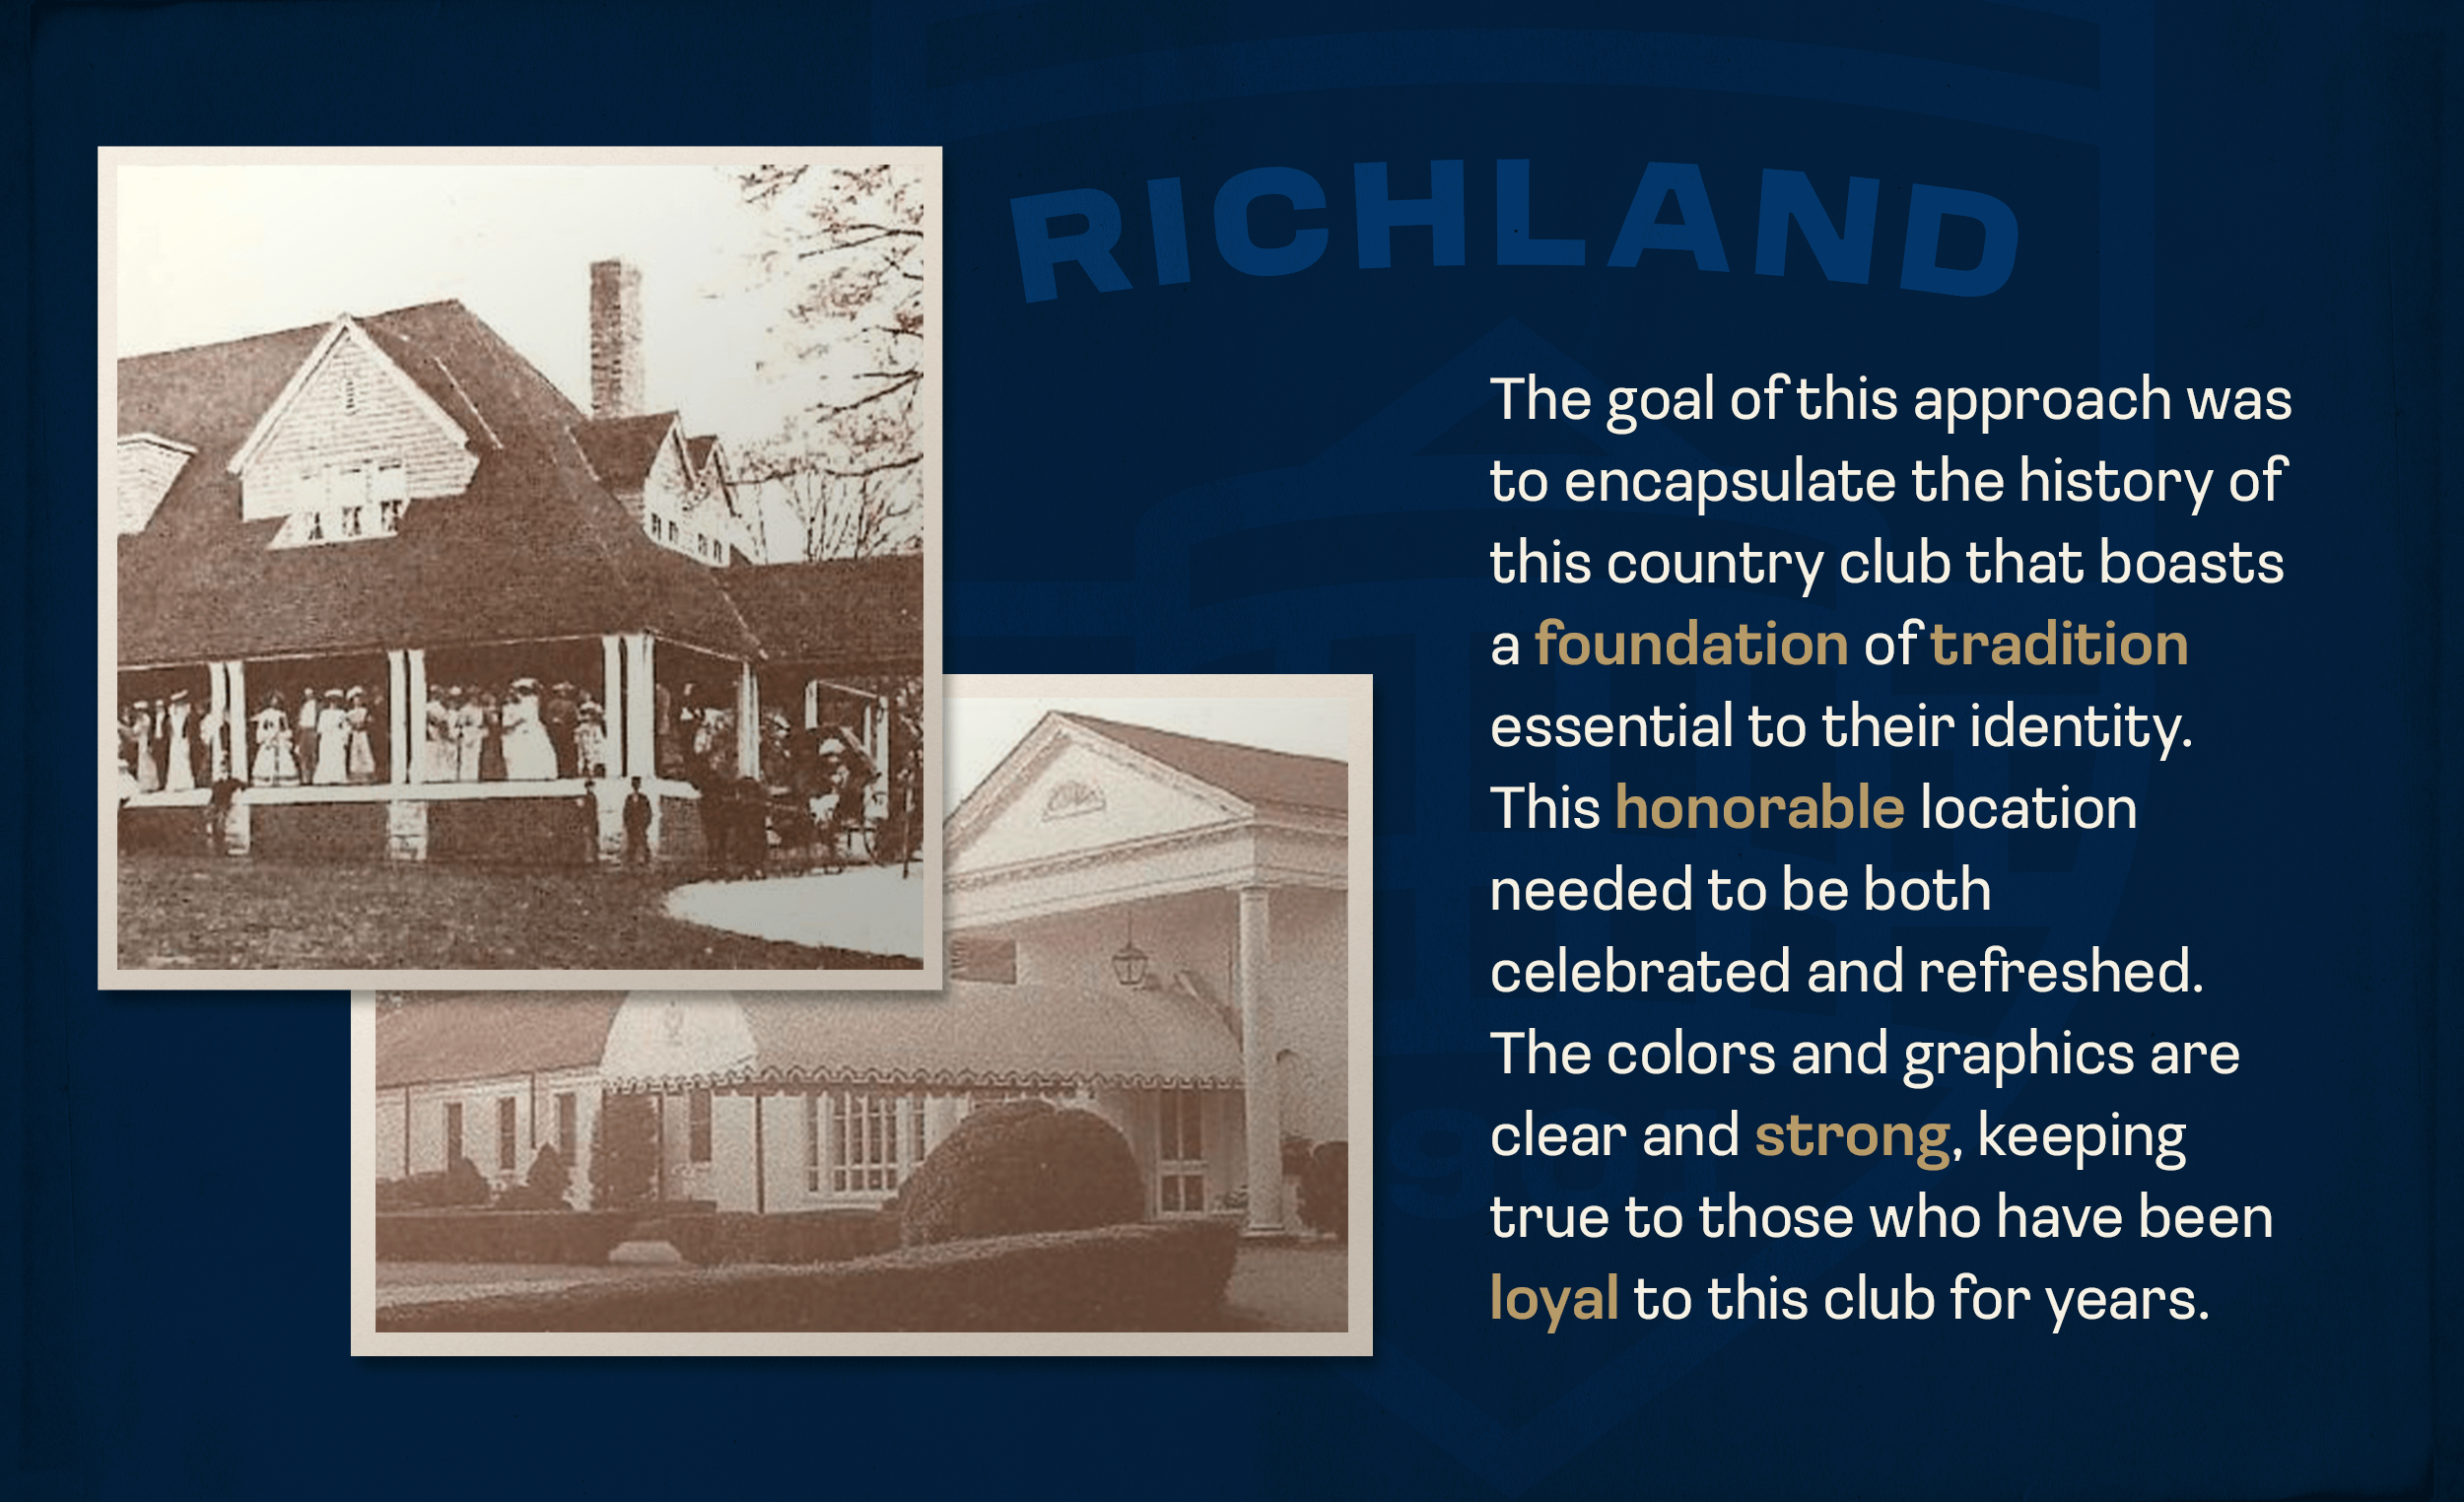 Two historic images of the Richland Country Club property sit on a dark blue background. To the right of them is a paragraph that reads: 